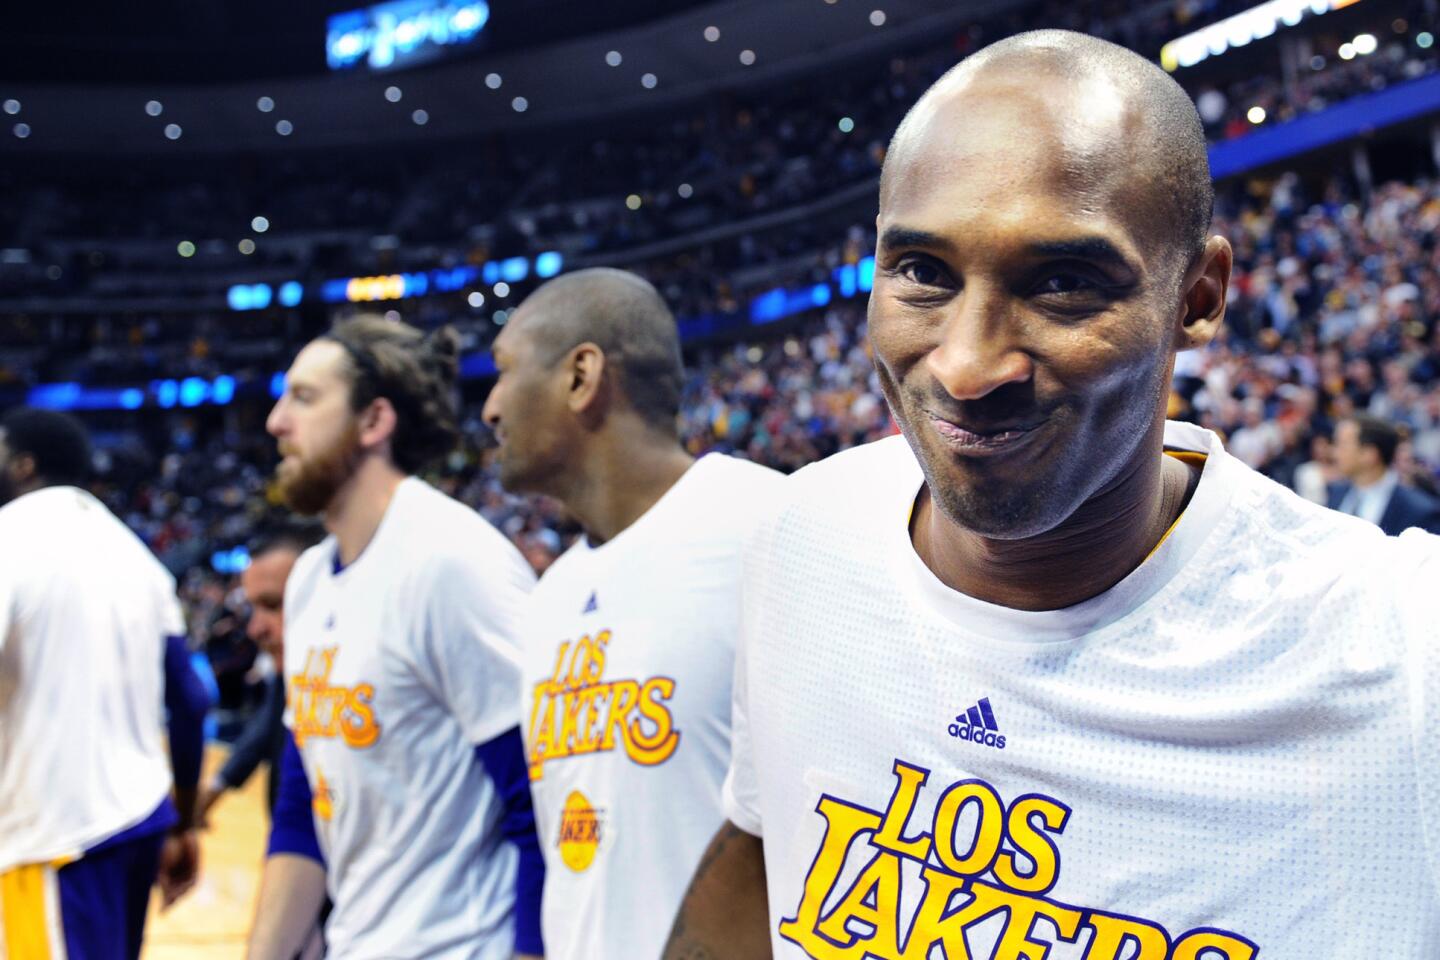 Kobe Bryant smiles as he leaves the courtafter his final game in Denver on March 2, 2016.